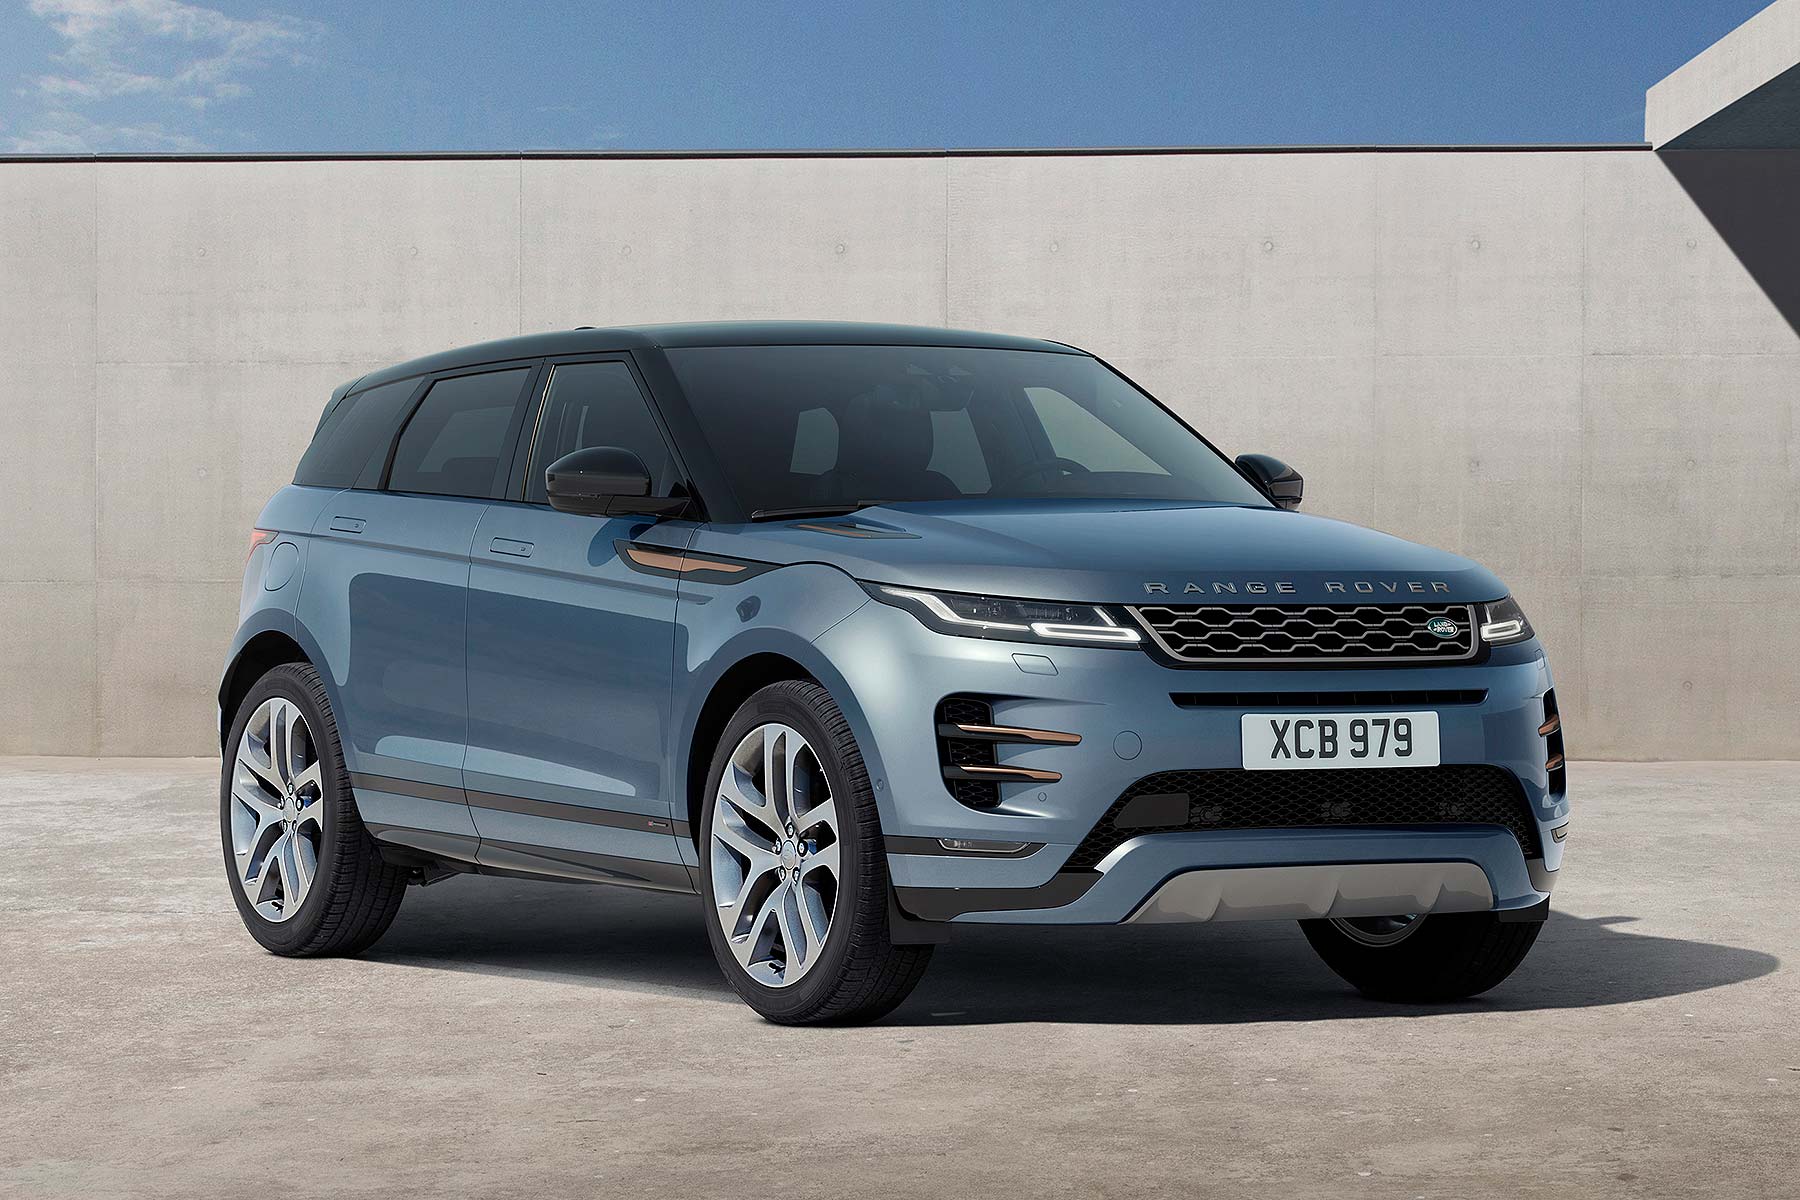 New 2019 Range Rover Evoque revealed and ordering is